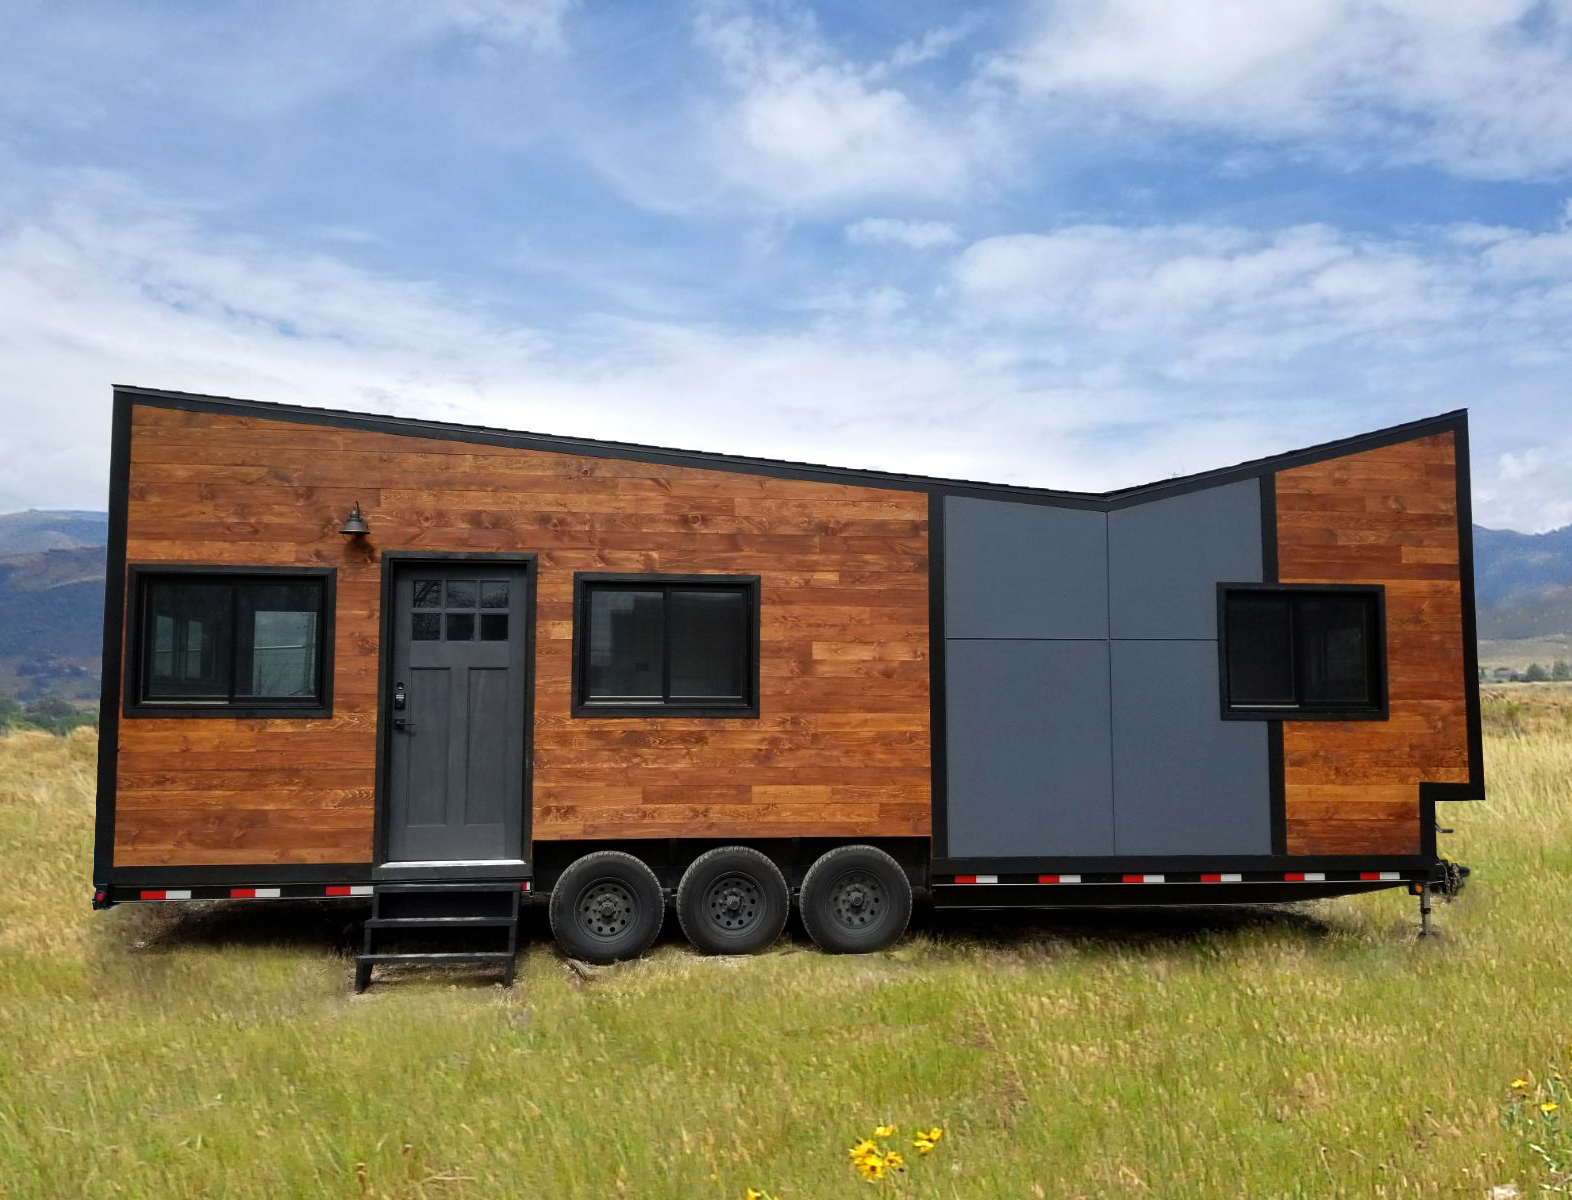 Where Can I Put My Tiny House A Near Comprehensive List Of Tiny House Parking Resources Tiny House Builders B B Micro Manufacturing,Sangria Recipe White Rum